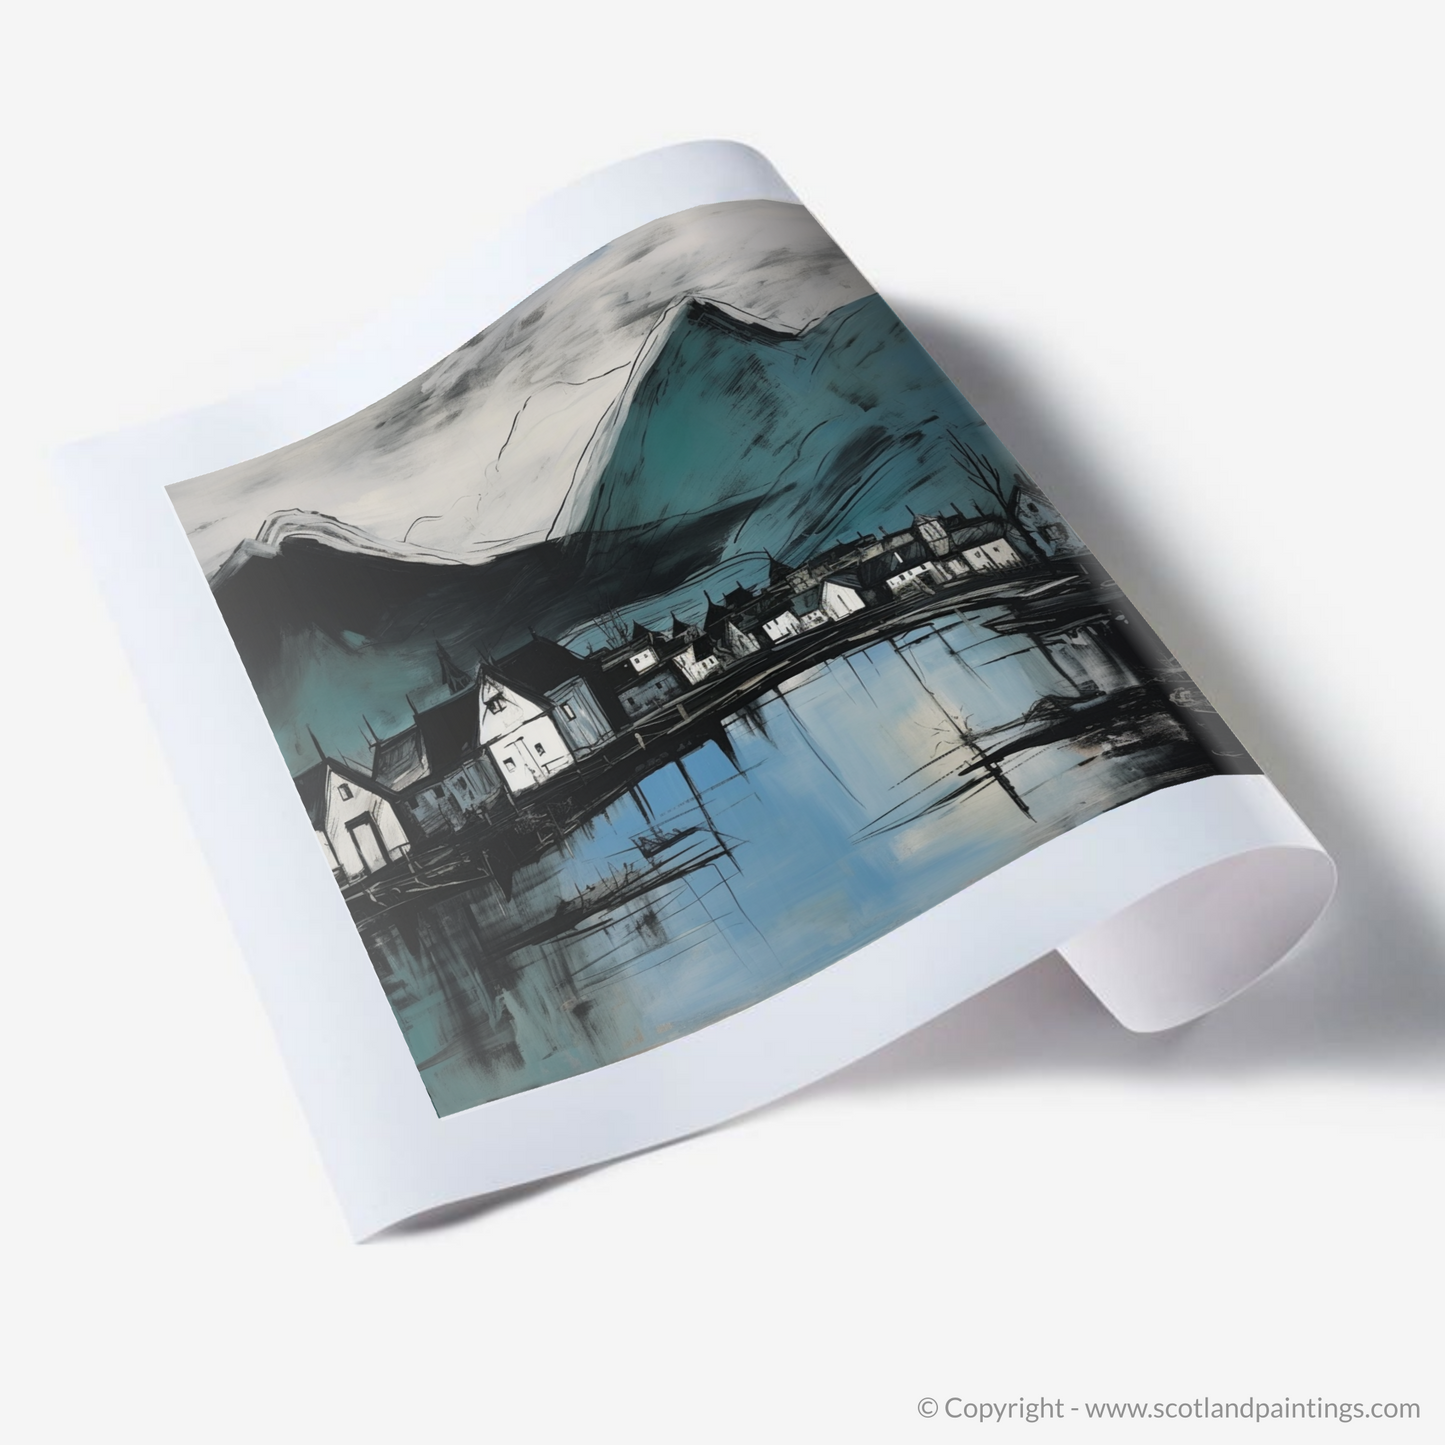 Painting and Art Print of Fort William, Highlands. Highland Serenity: An Illustrative Expression of Fort William.